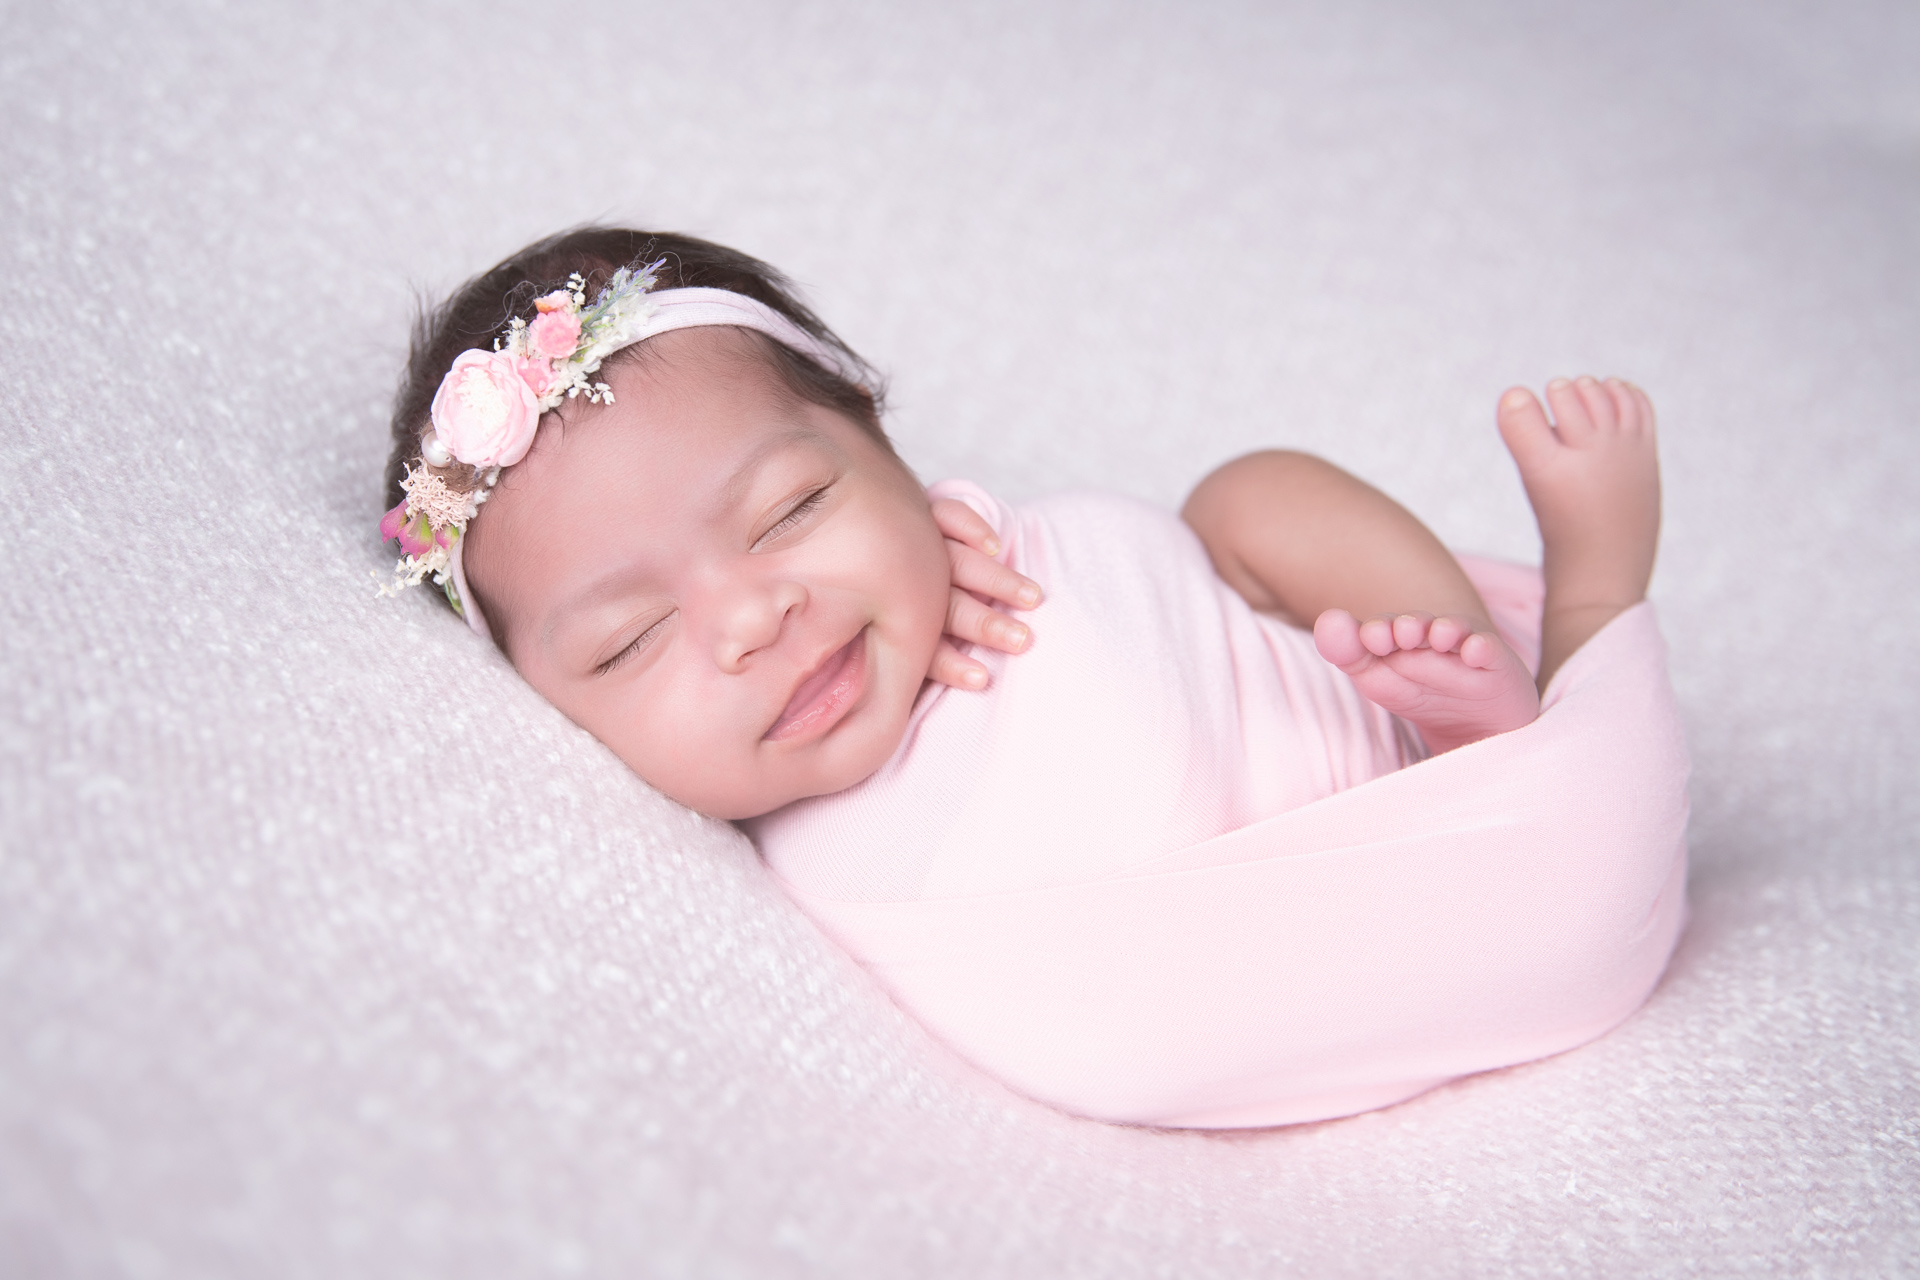 Newborn rests wearing pink wrap and headband. Pink background.